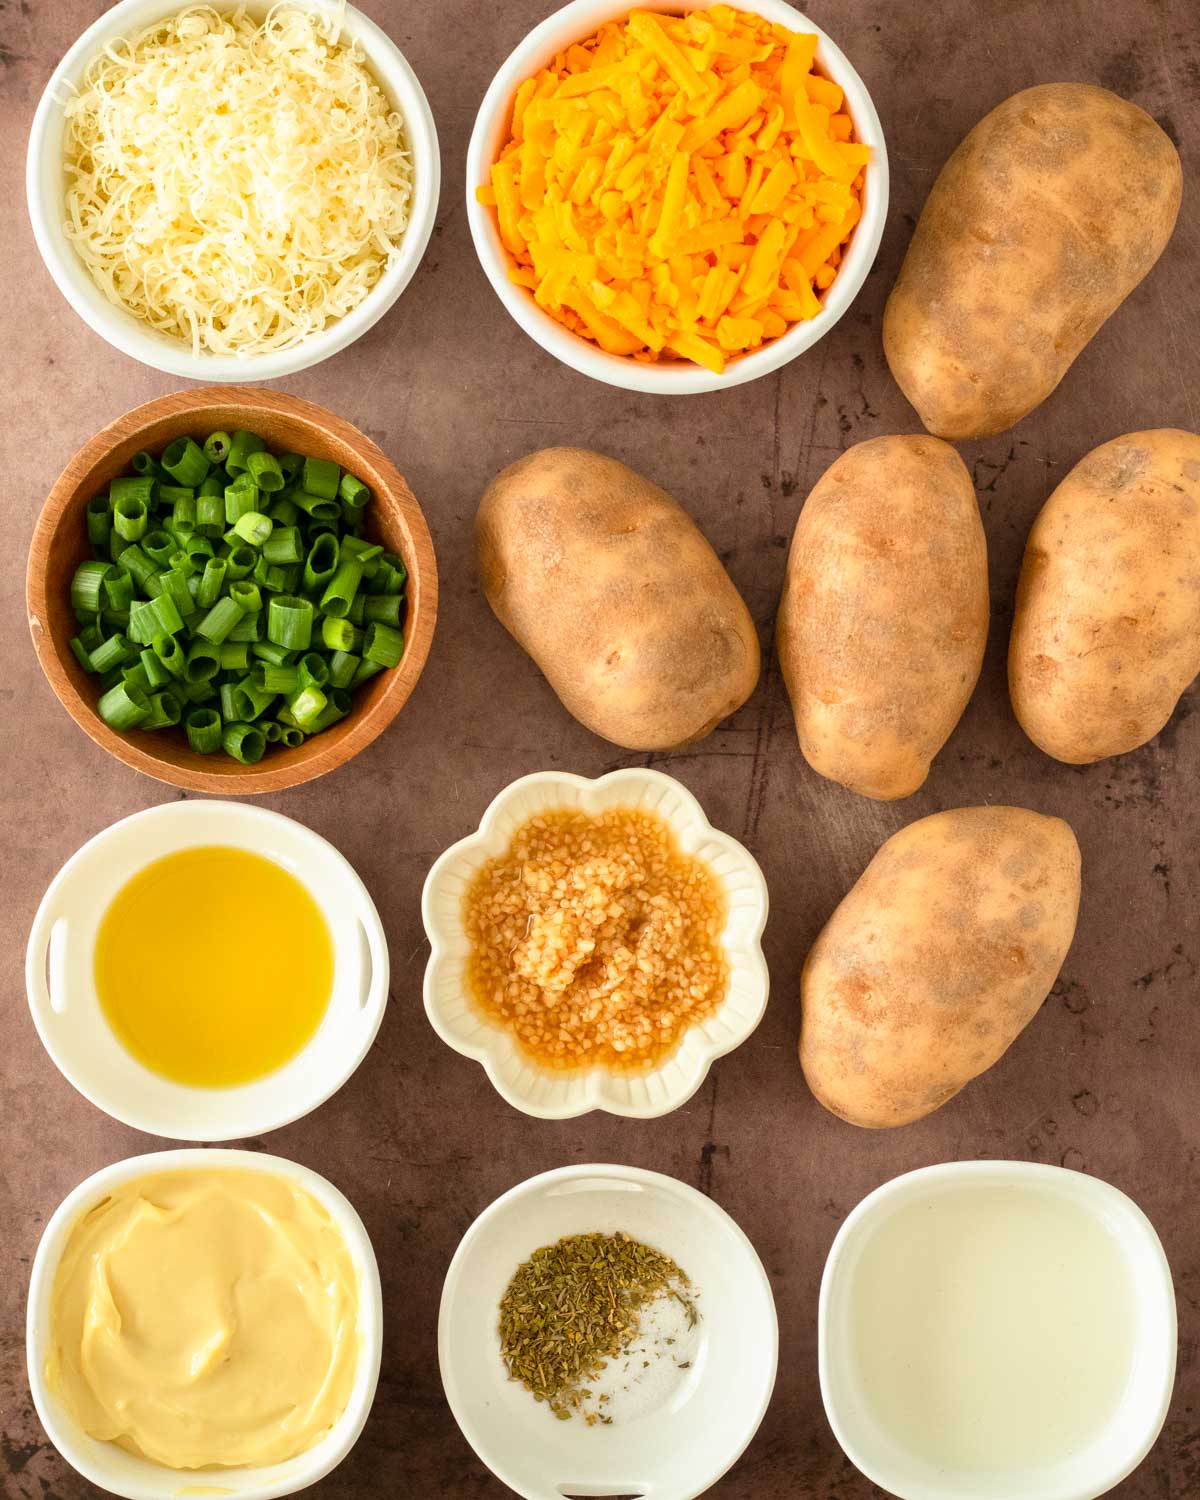 Ingredients for Twice Baked Potatoes Recipe